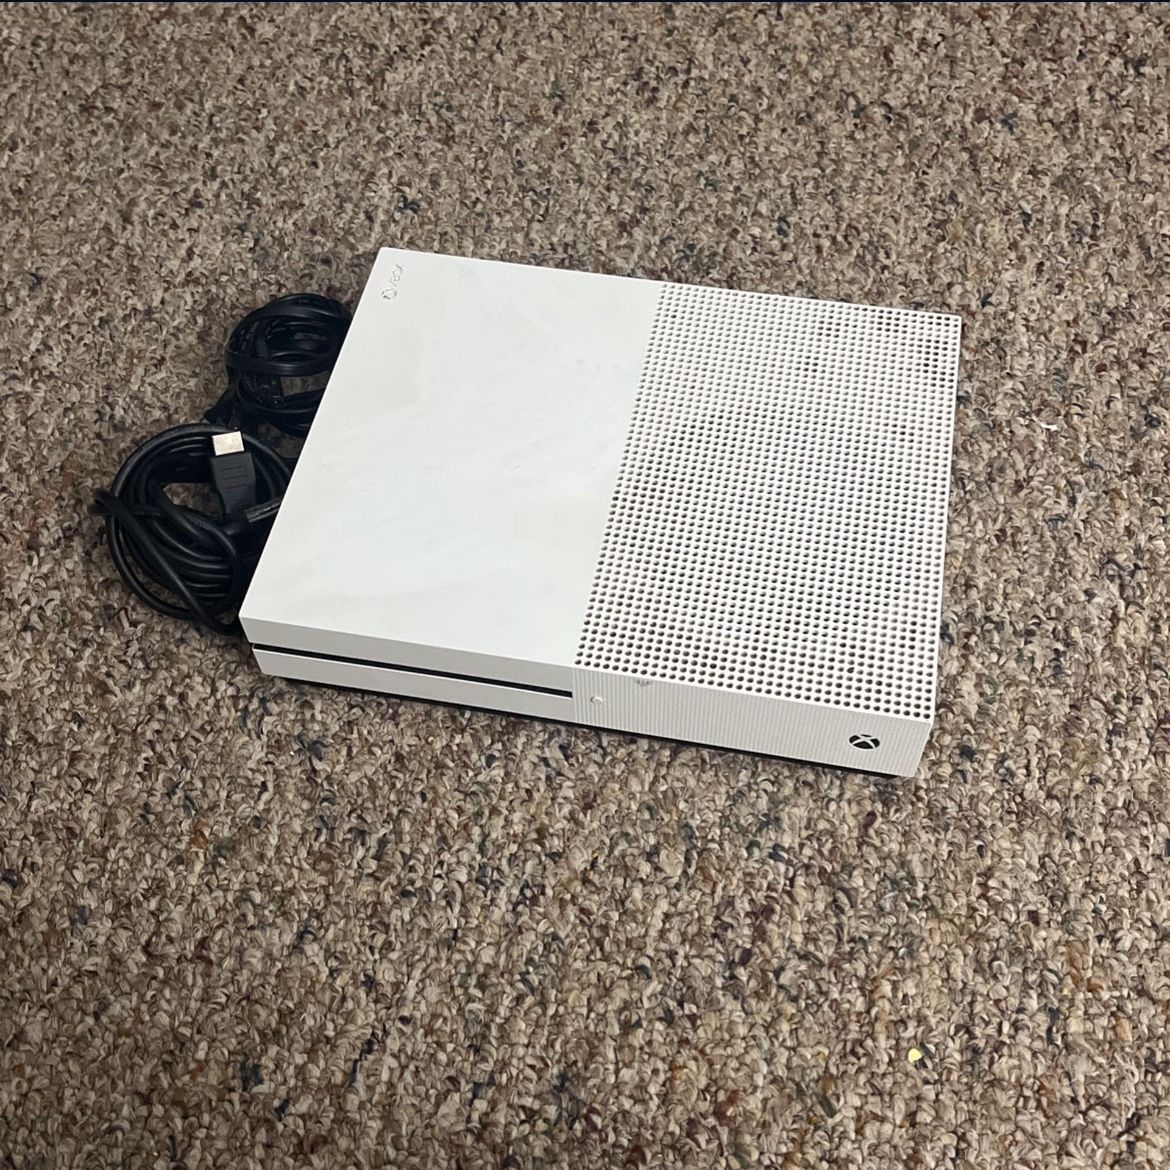 White And Black Xbox One S